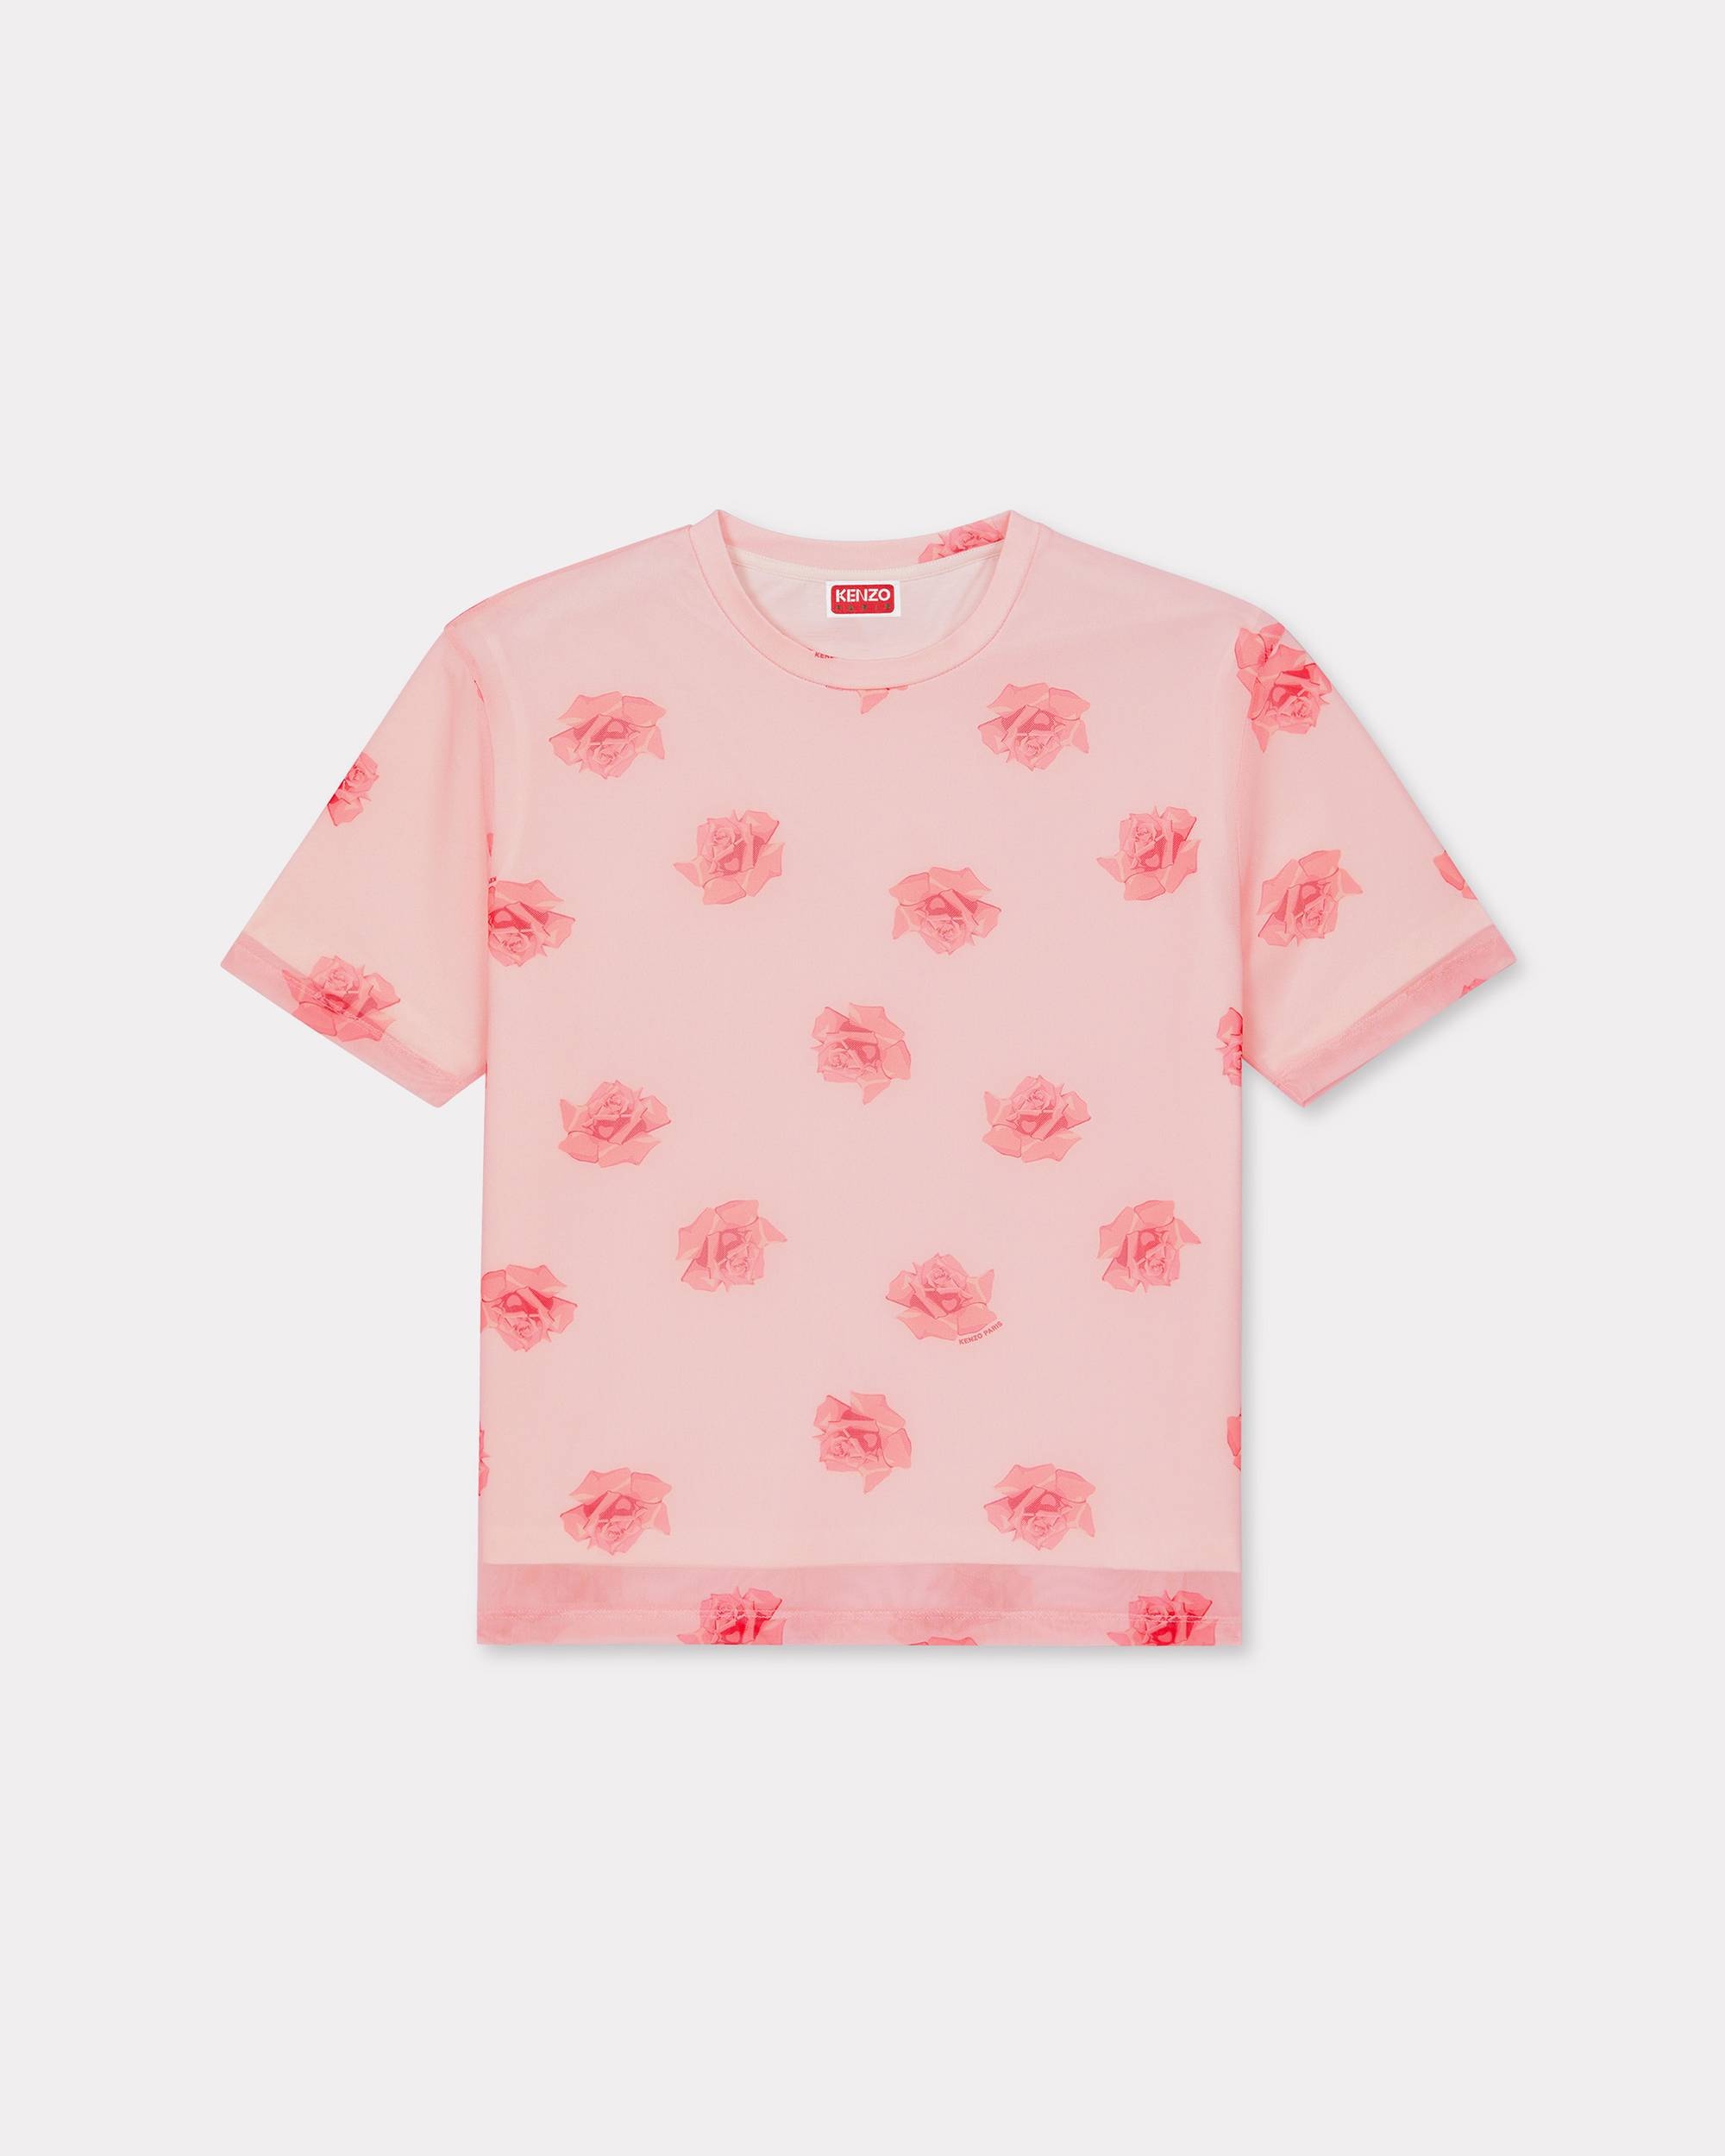 'KENZO Rose' double layer T-shirt - 1